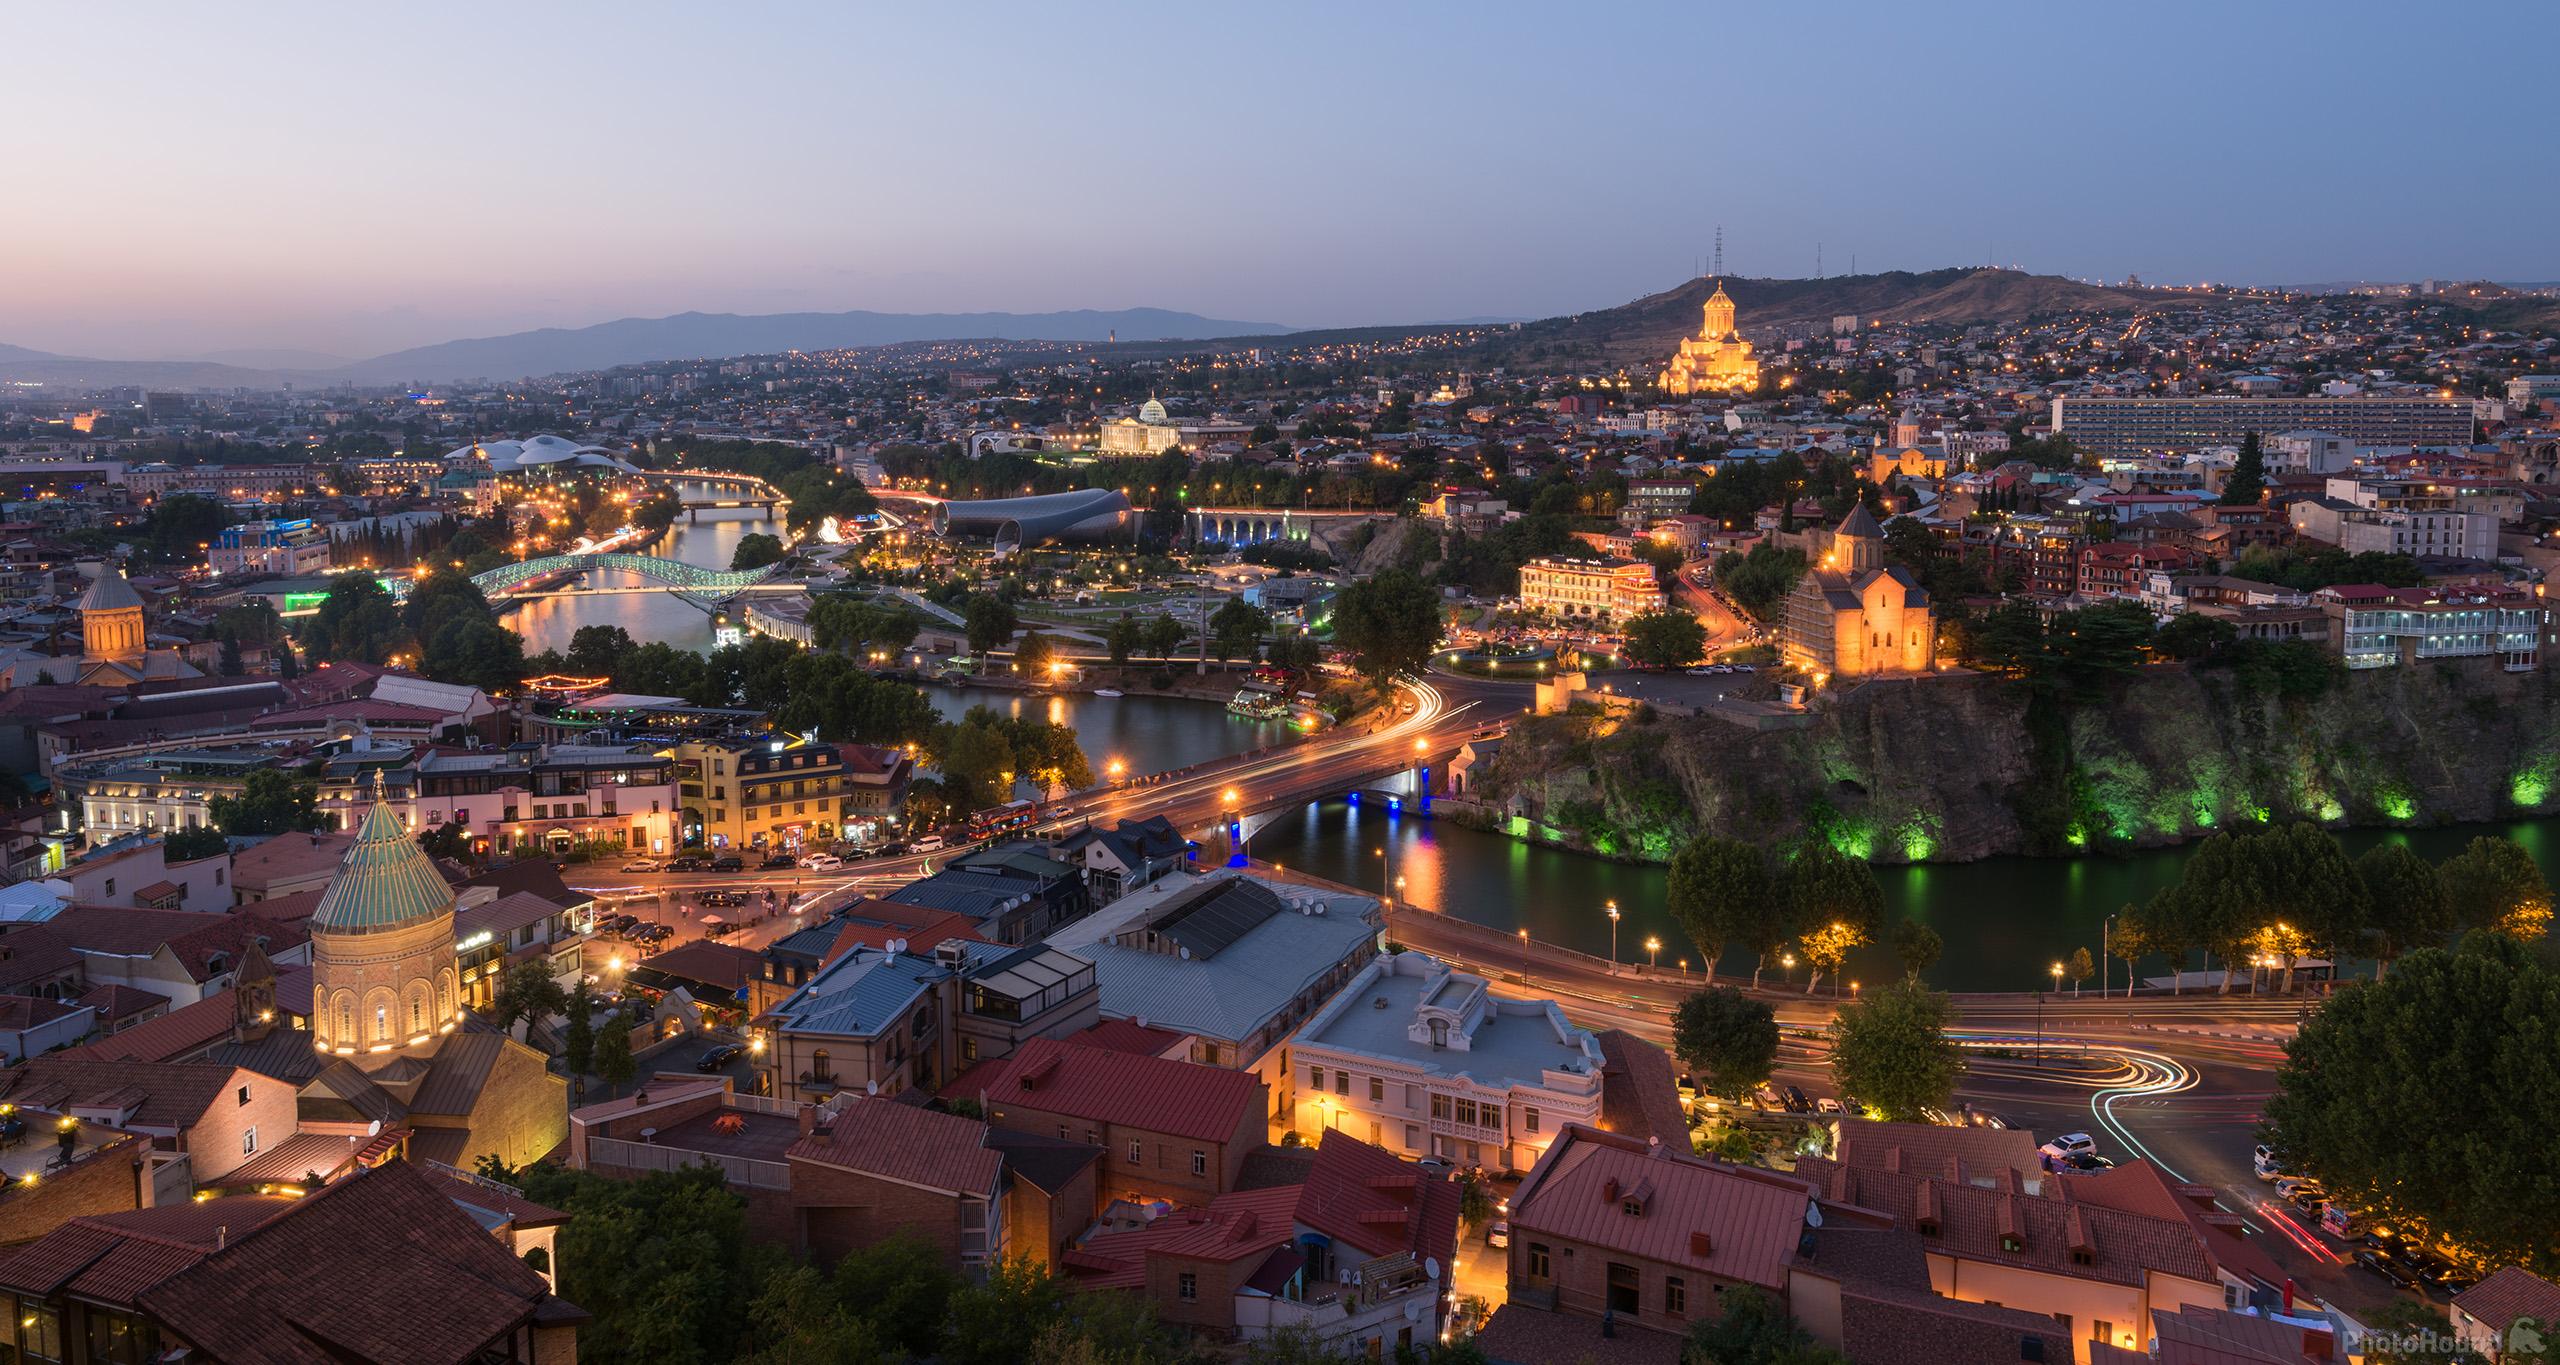 Image of Tbilisi from Narikala Fort by Luka Esenko